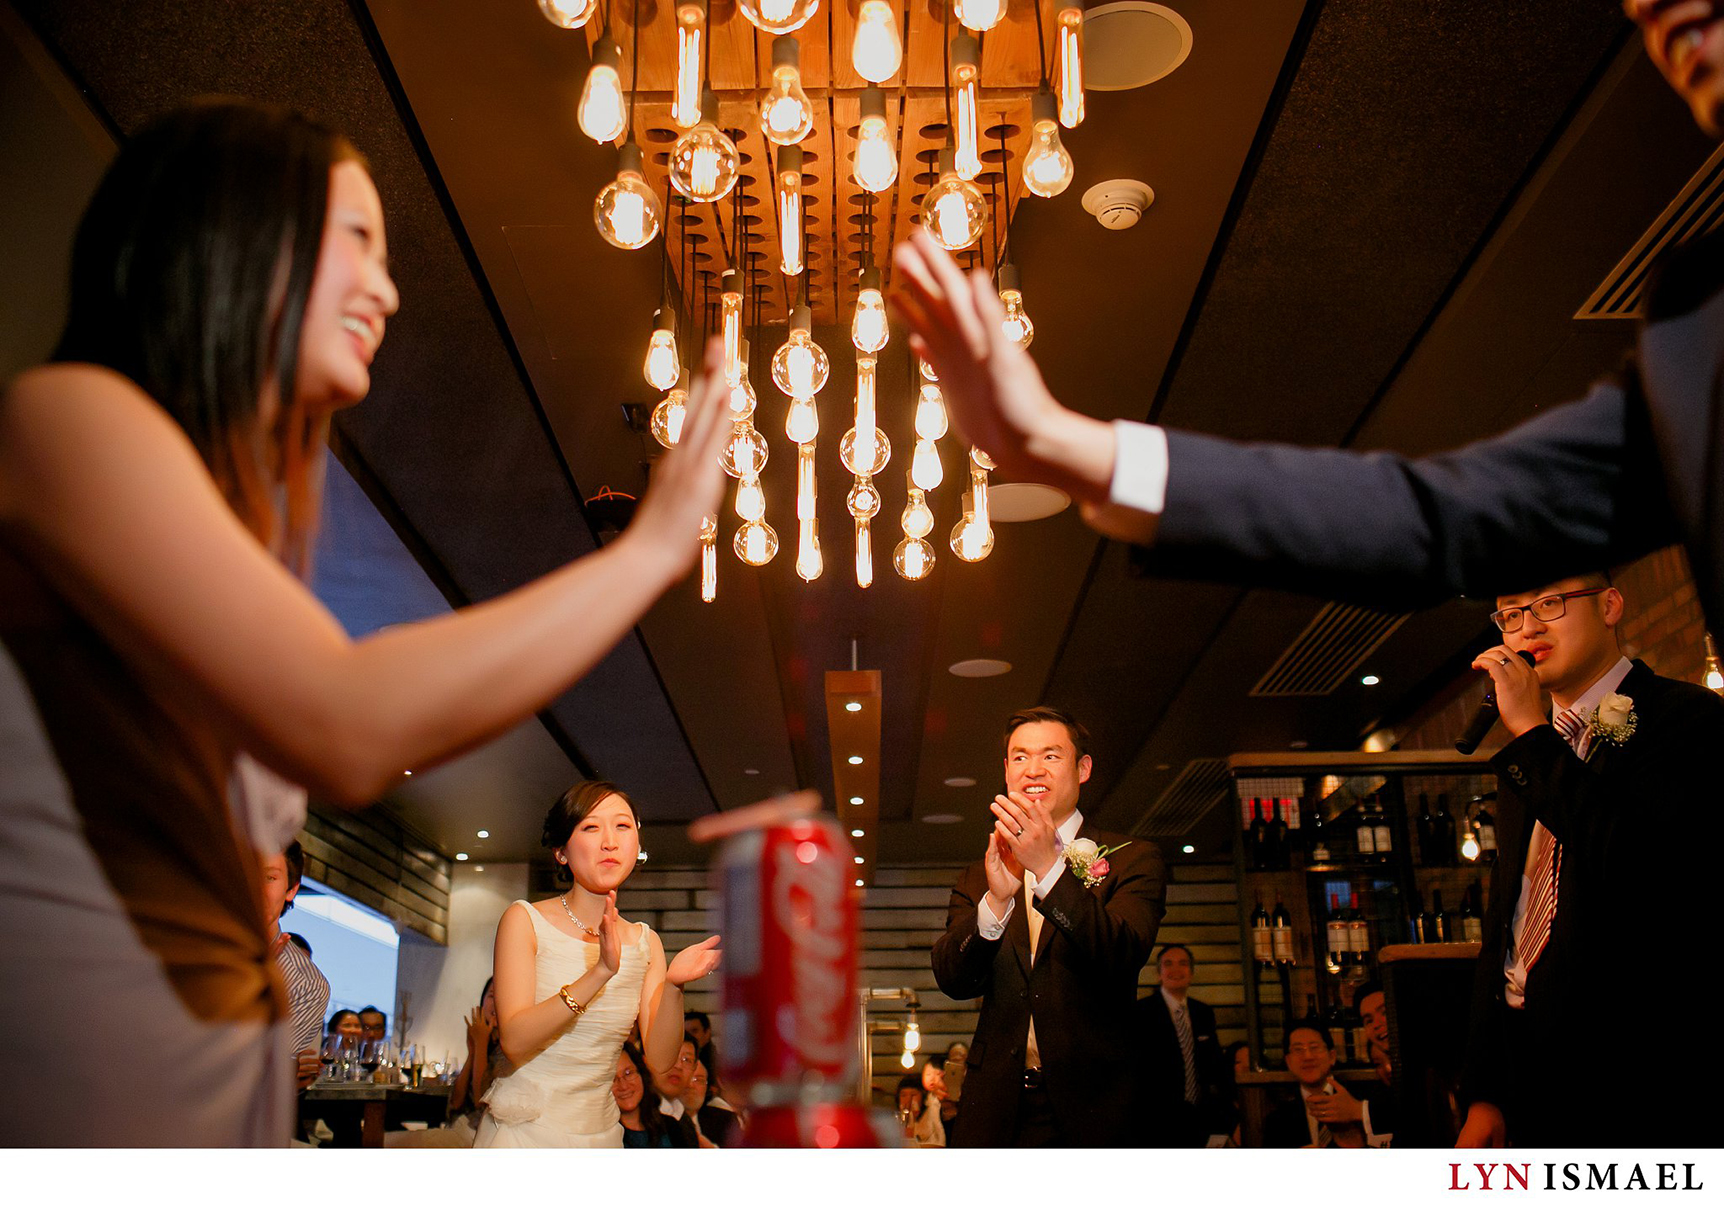 Bride and groom competes with their guests at a wedding at the Reds Wine Tavern in Toronto, Ontario.